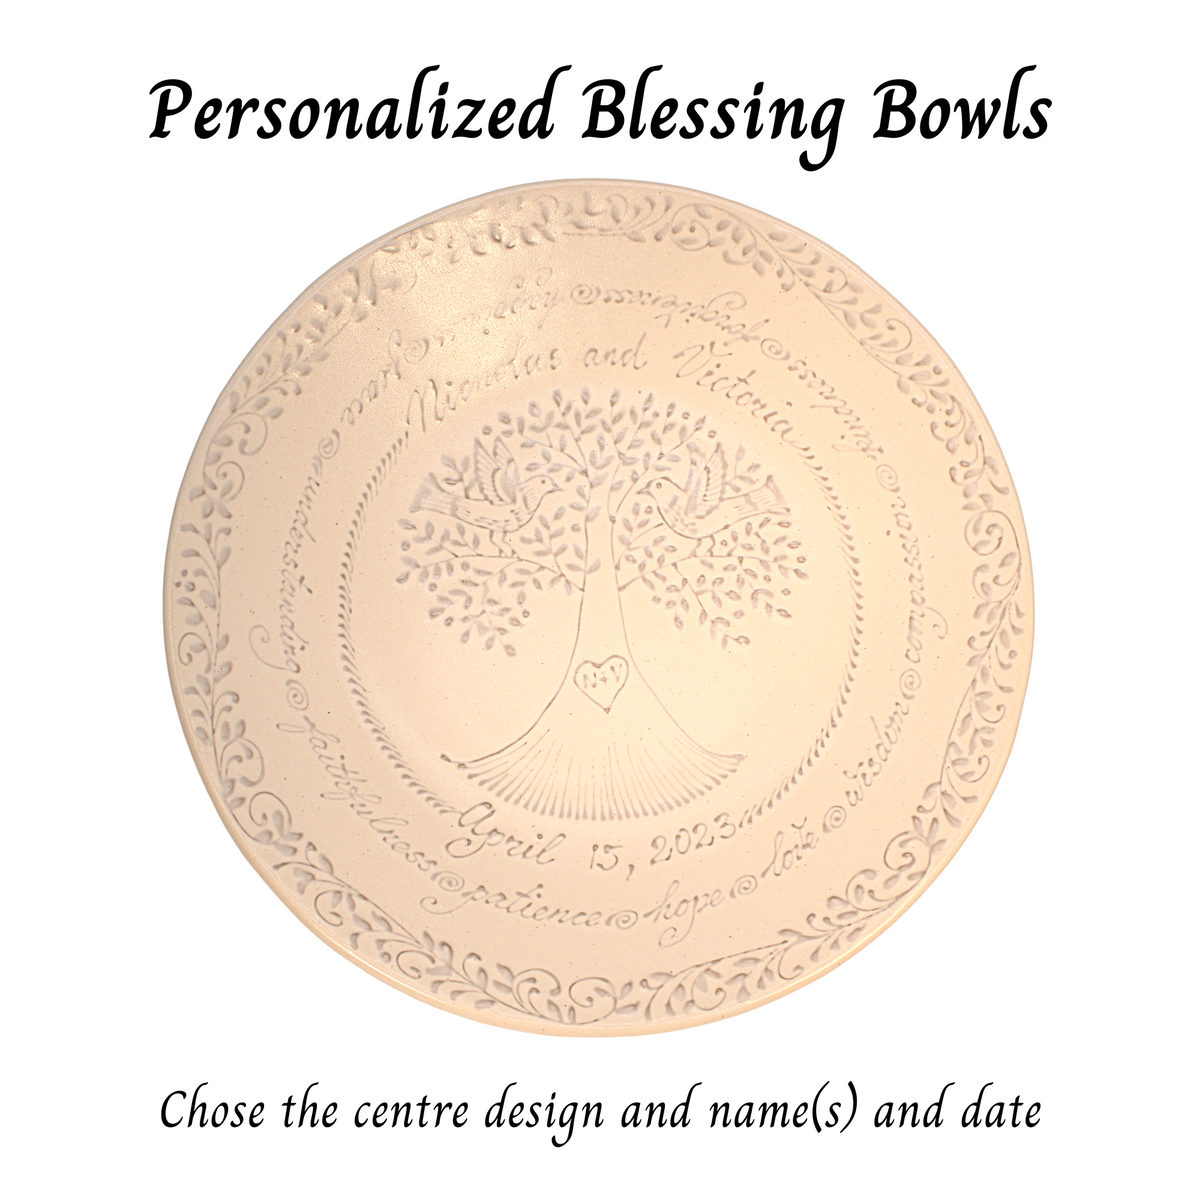 PERSONALIZED BLESSING BOWLS